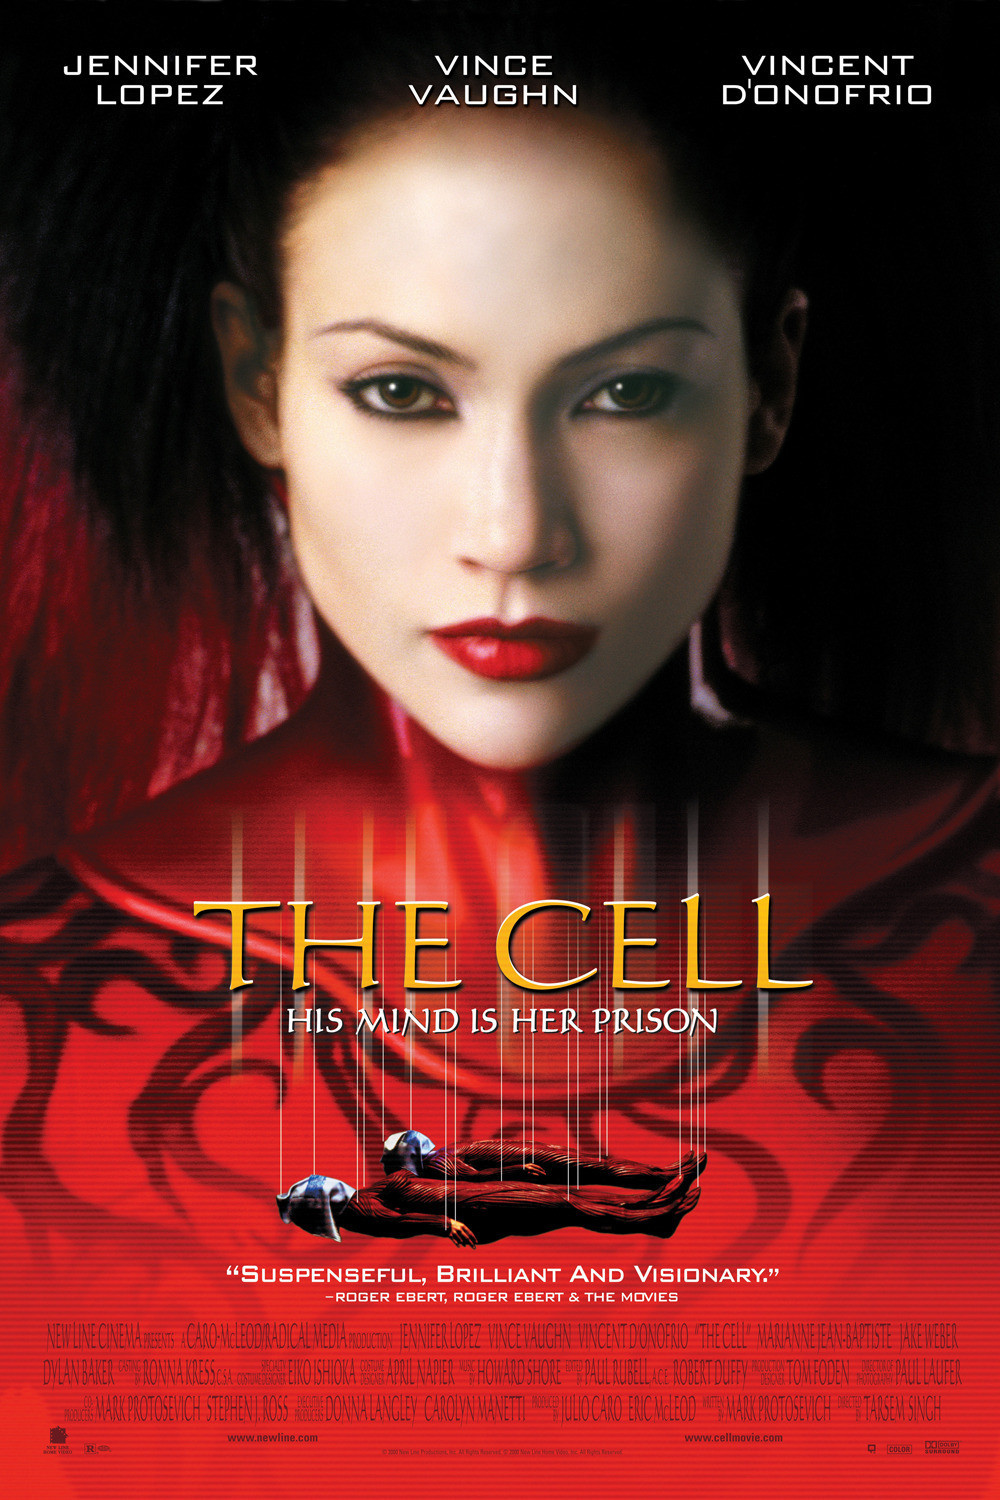 The Cell (2000) one of the best Jennifer Lopez Movies